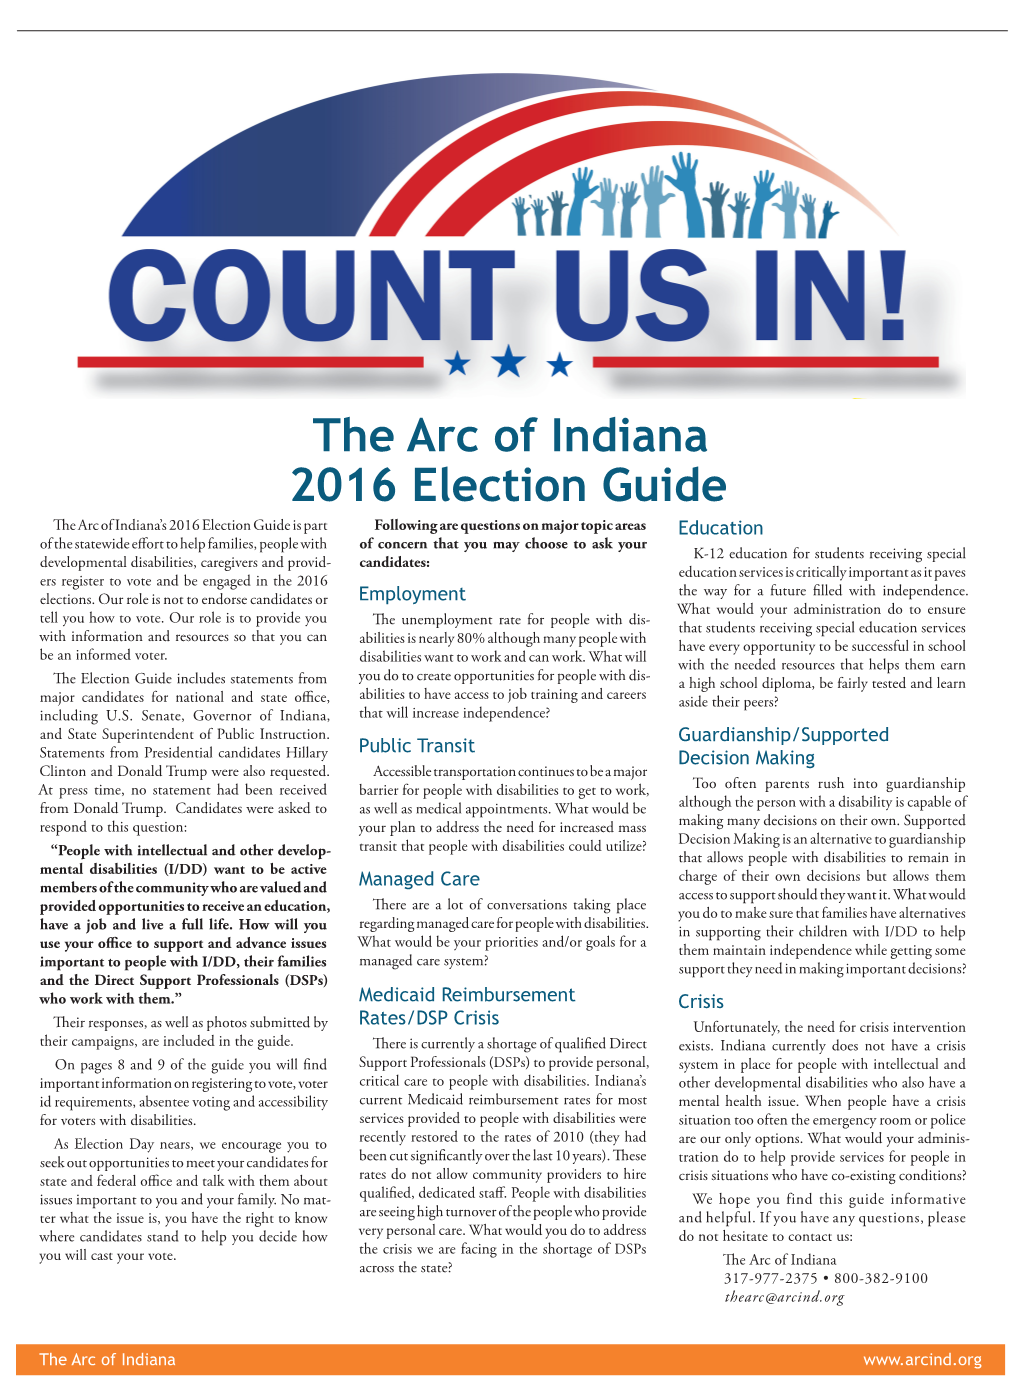 2016 Election Guide the Arc of Indiana